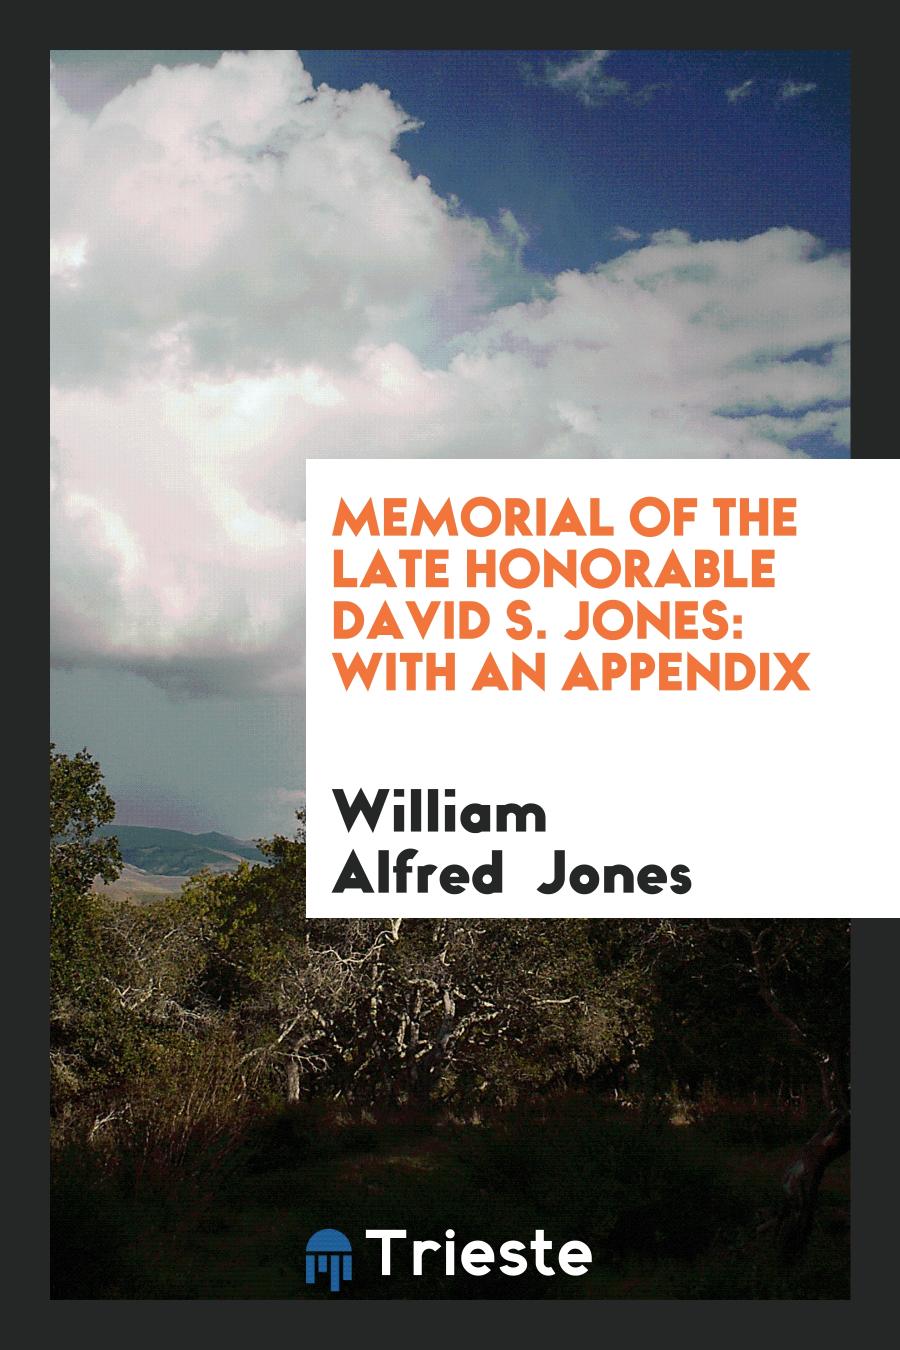 Memorial of the Late Honorable David S. Jones: With an Appendix